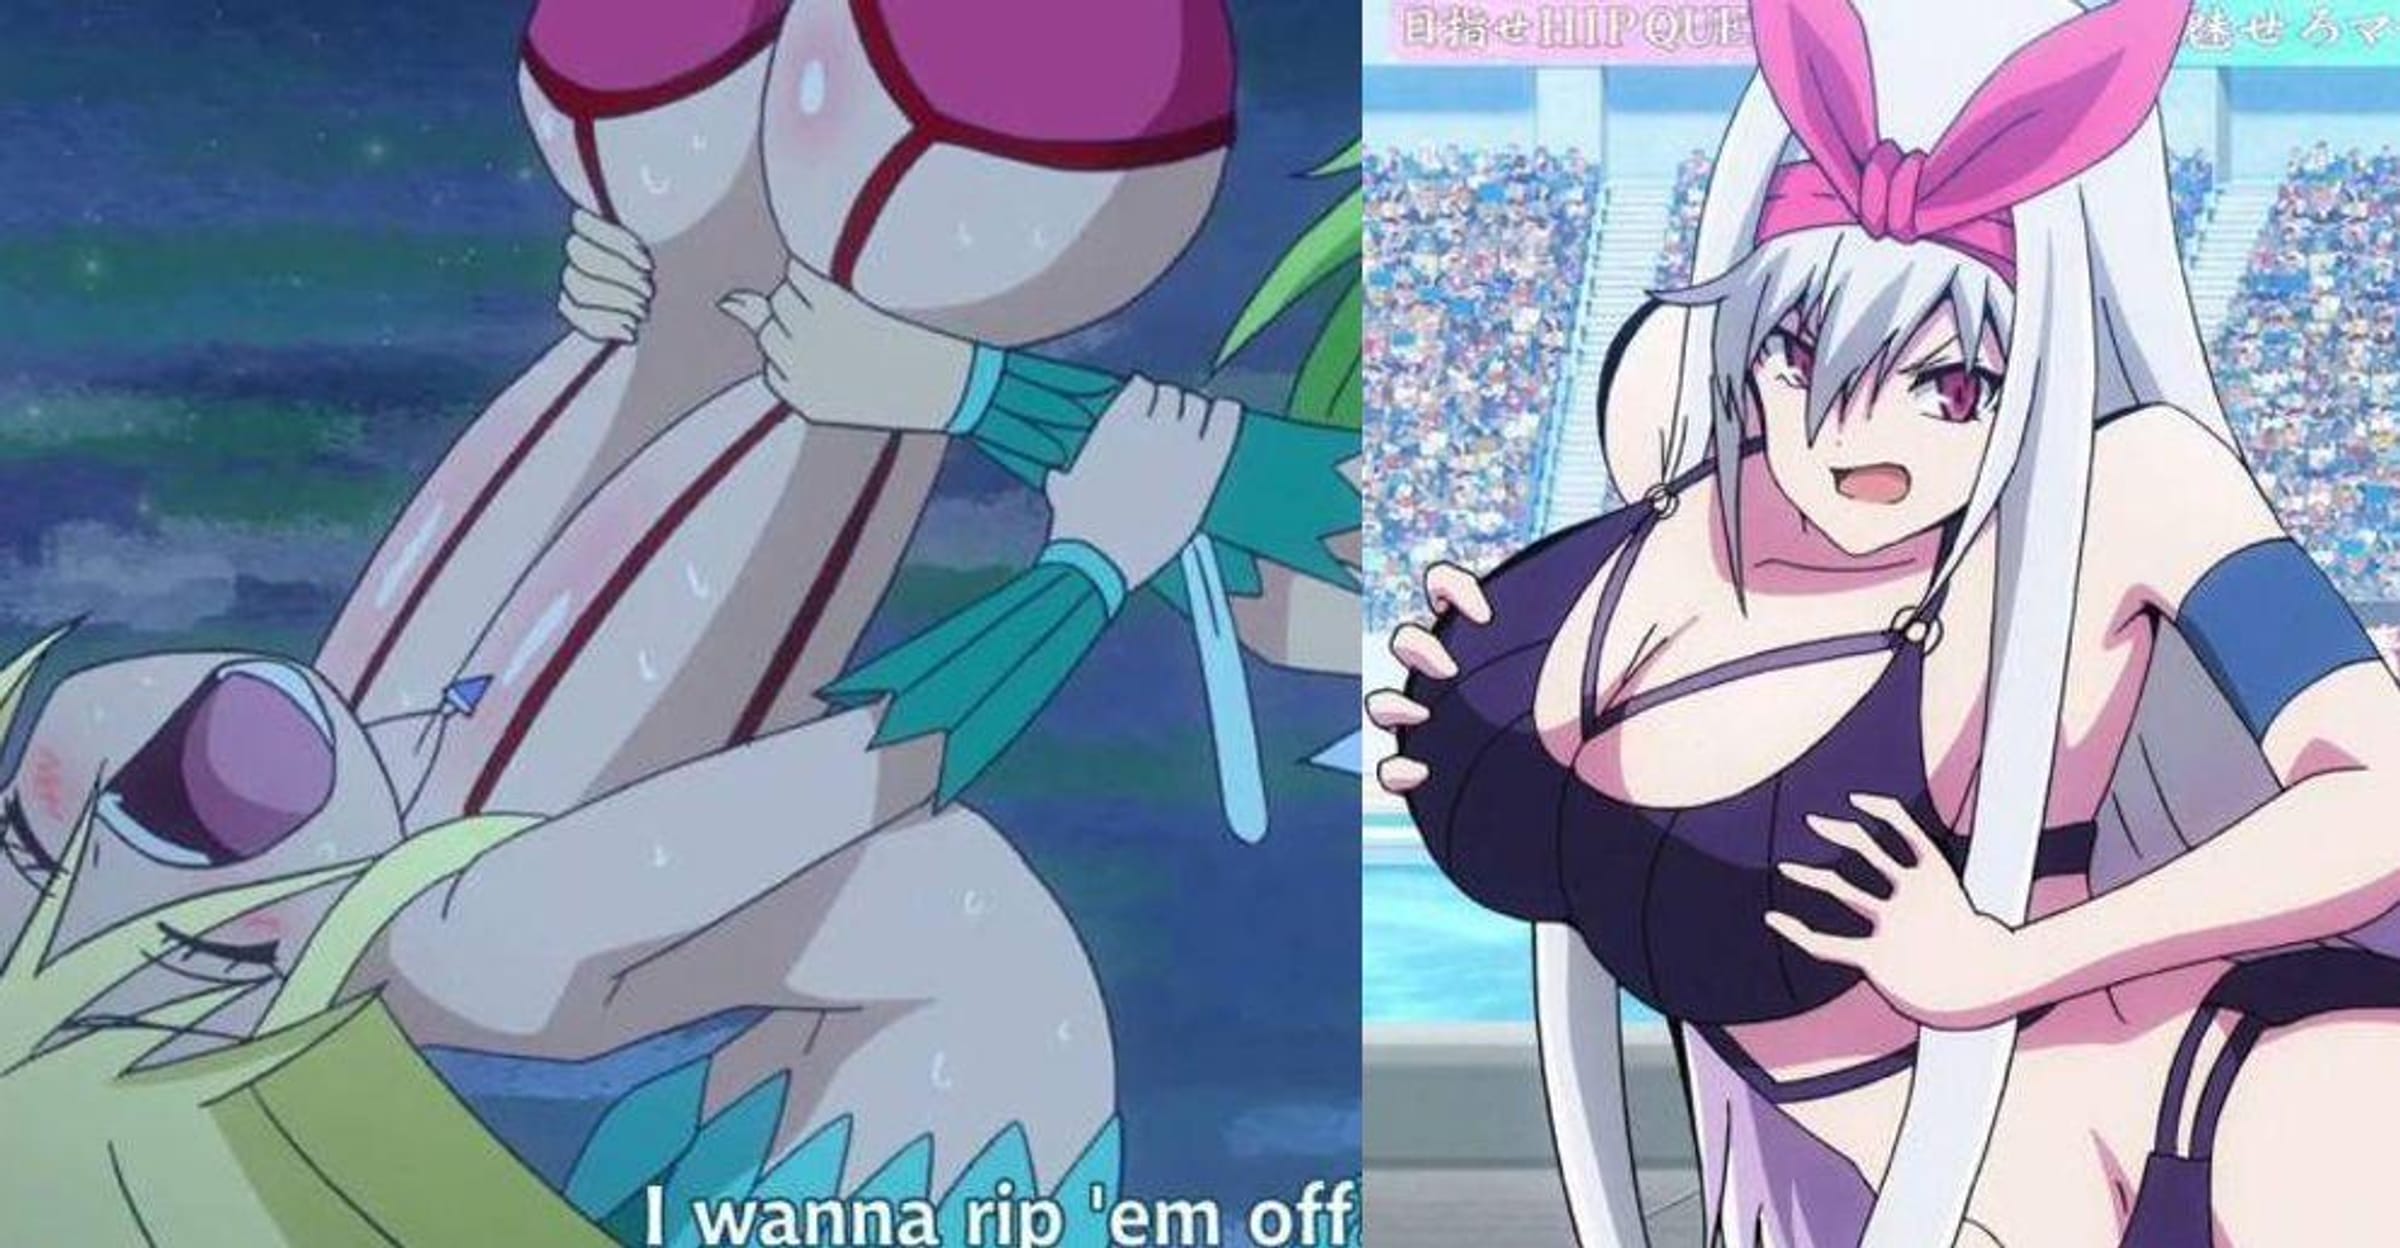 Top 16 Busty Female Anime Characters With Big Oppais